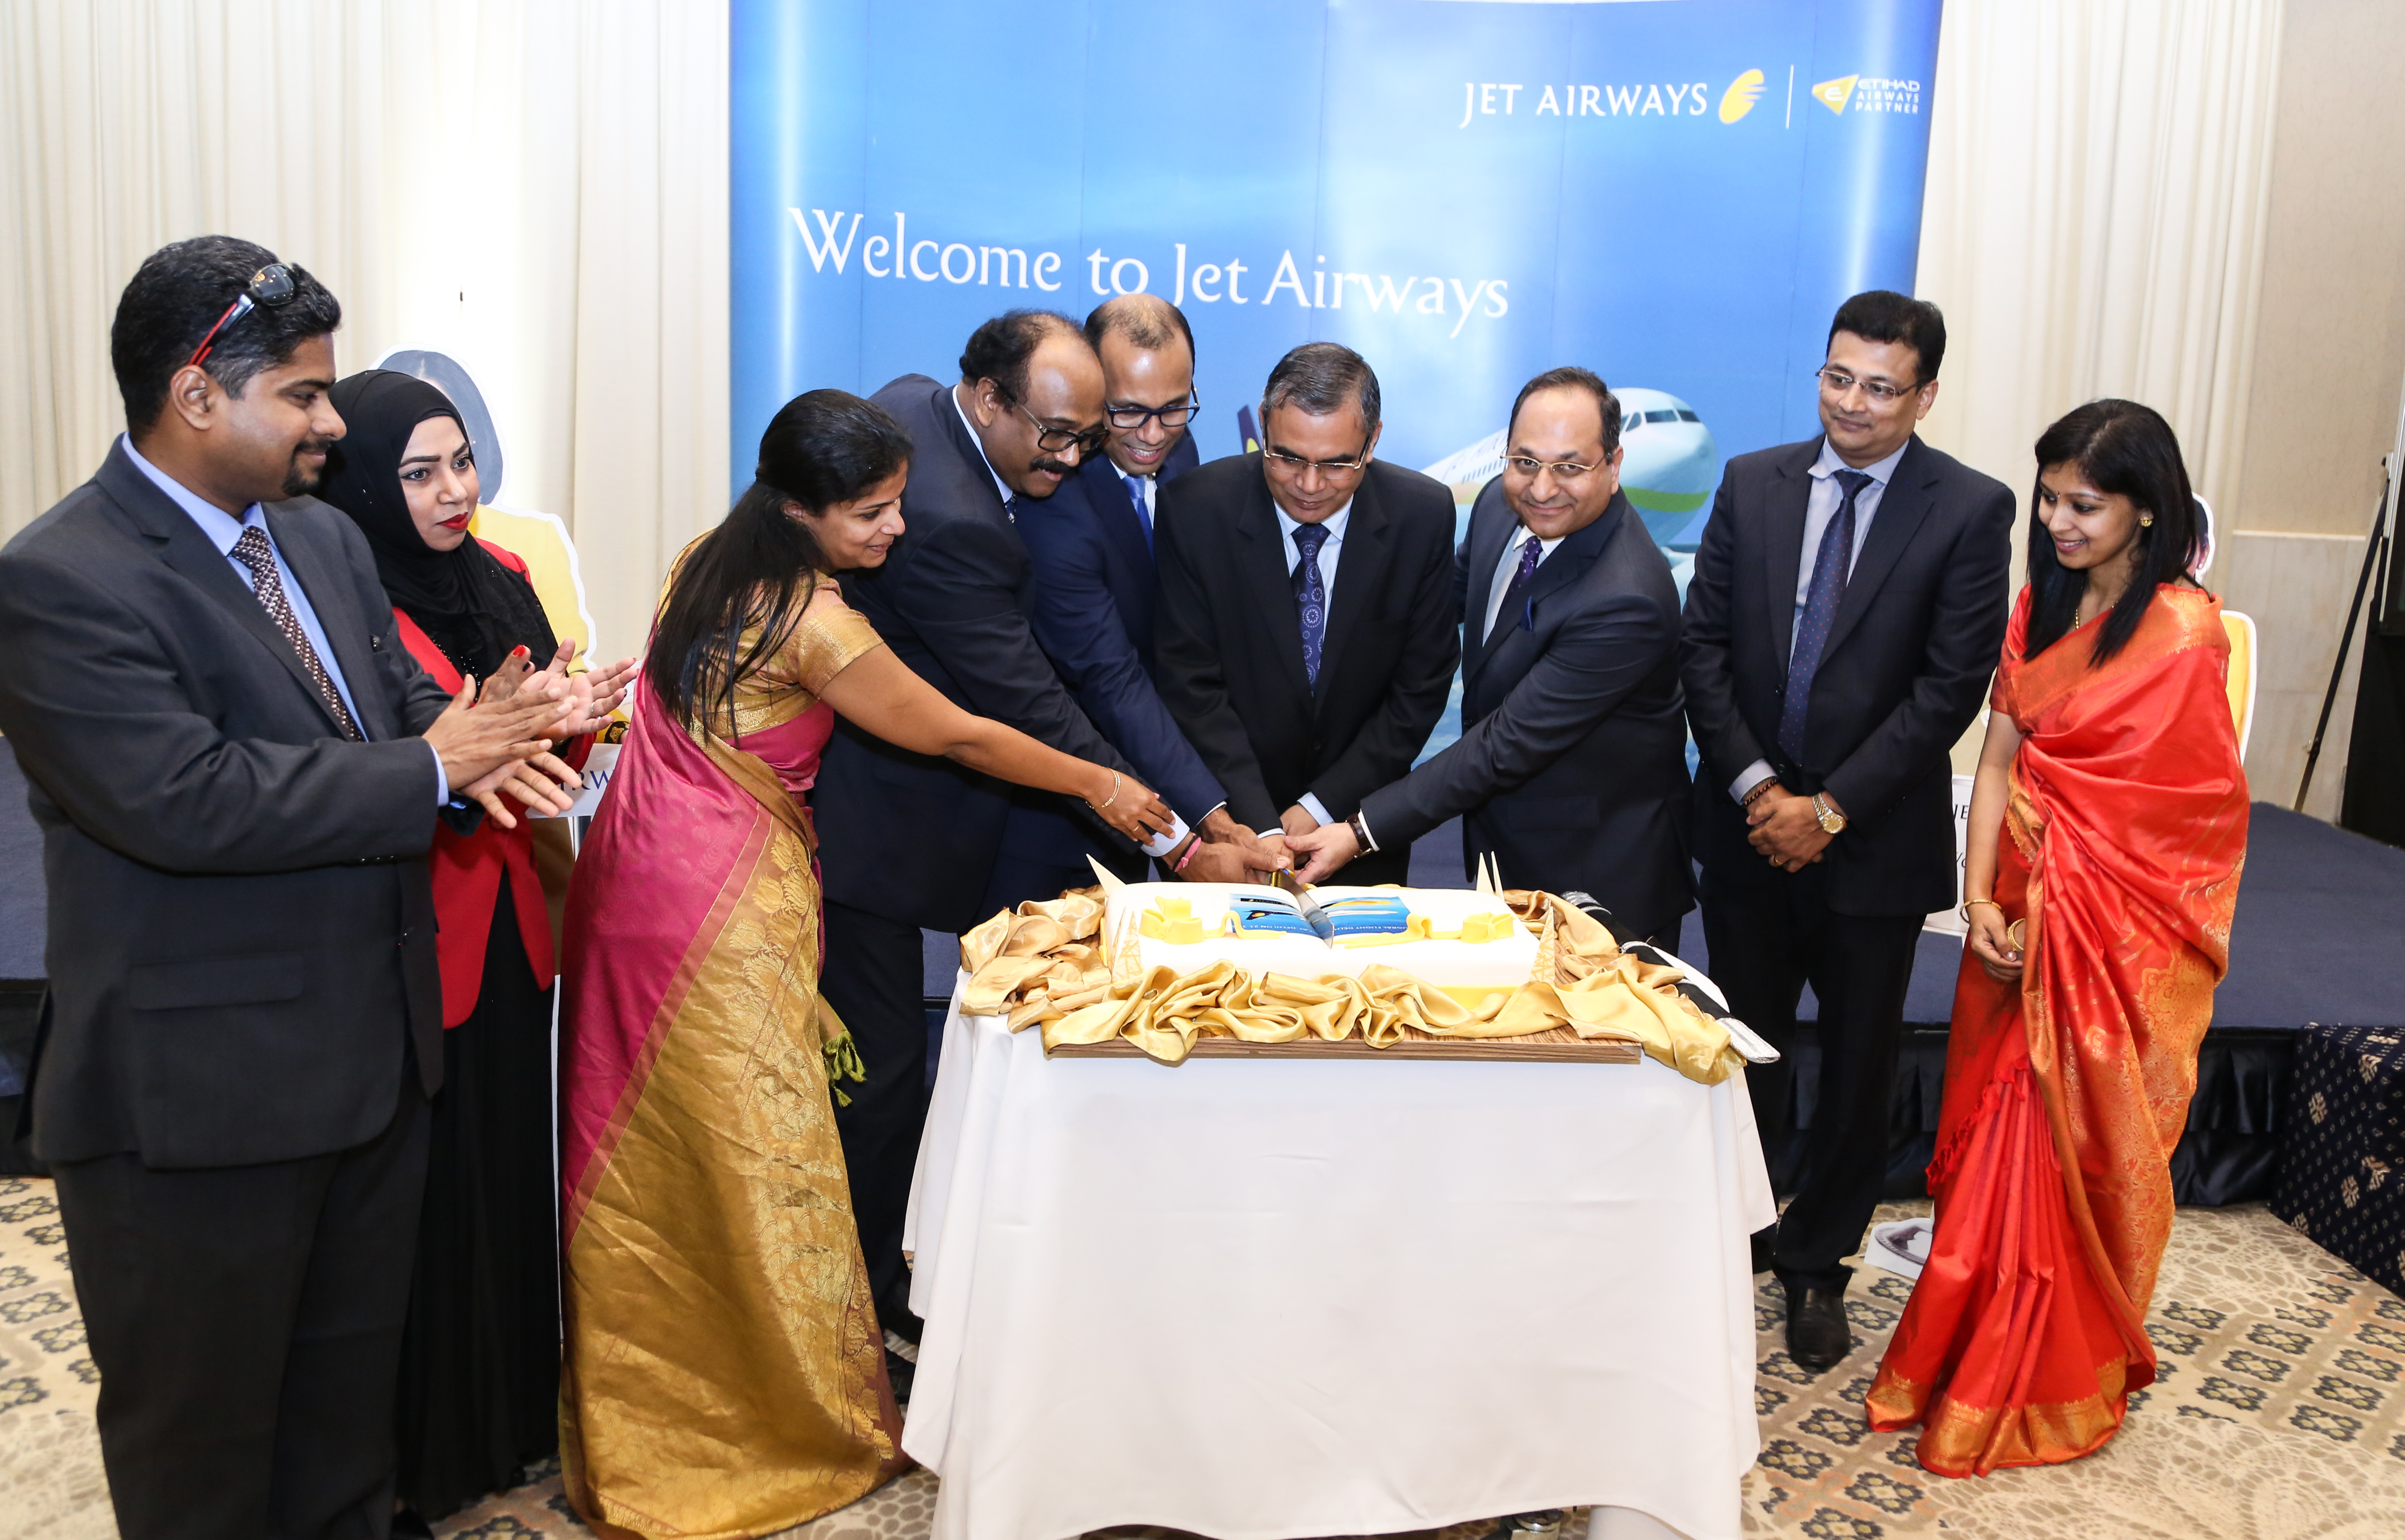 Jet Airways’ inaugural flight from Muscat to Delhi takes off